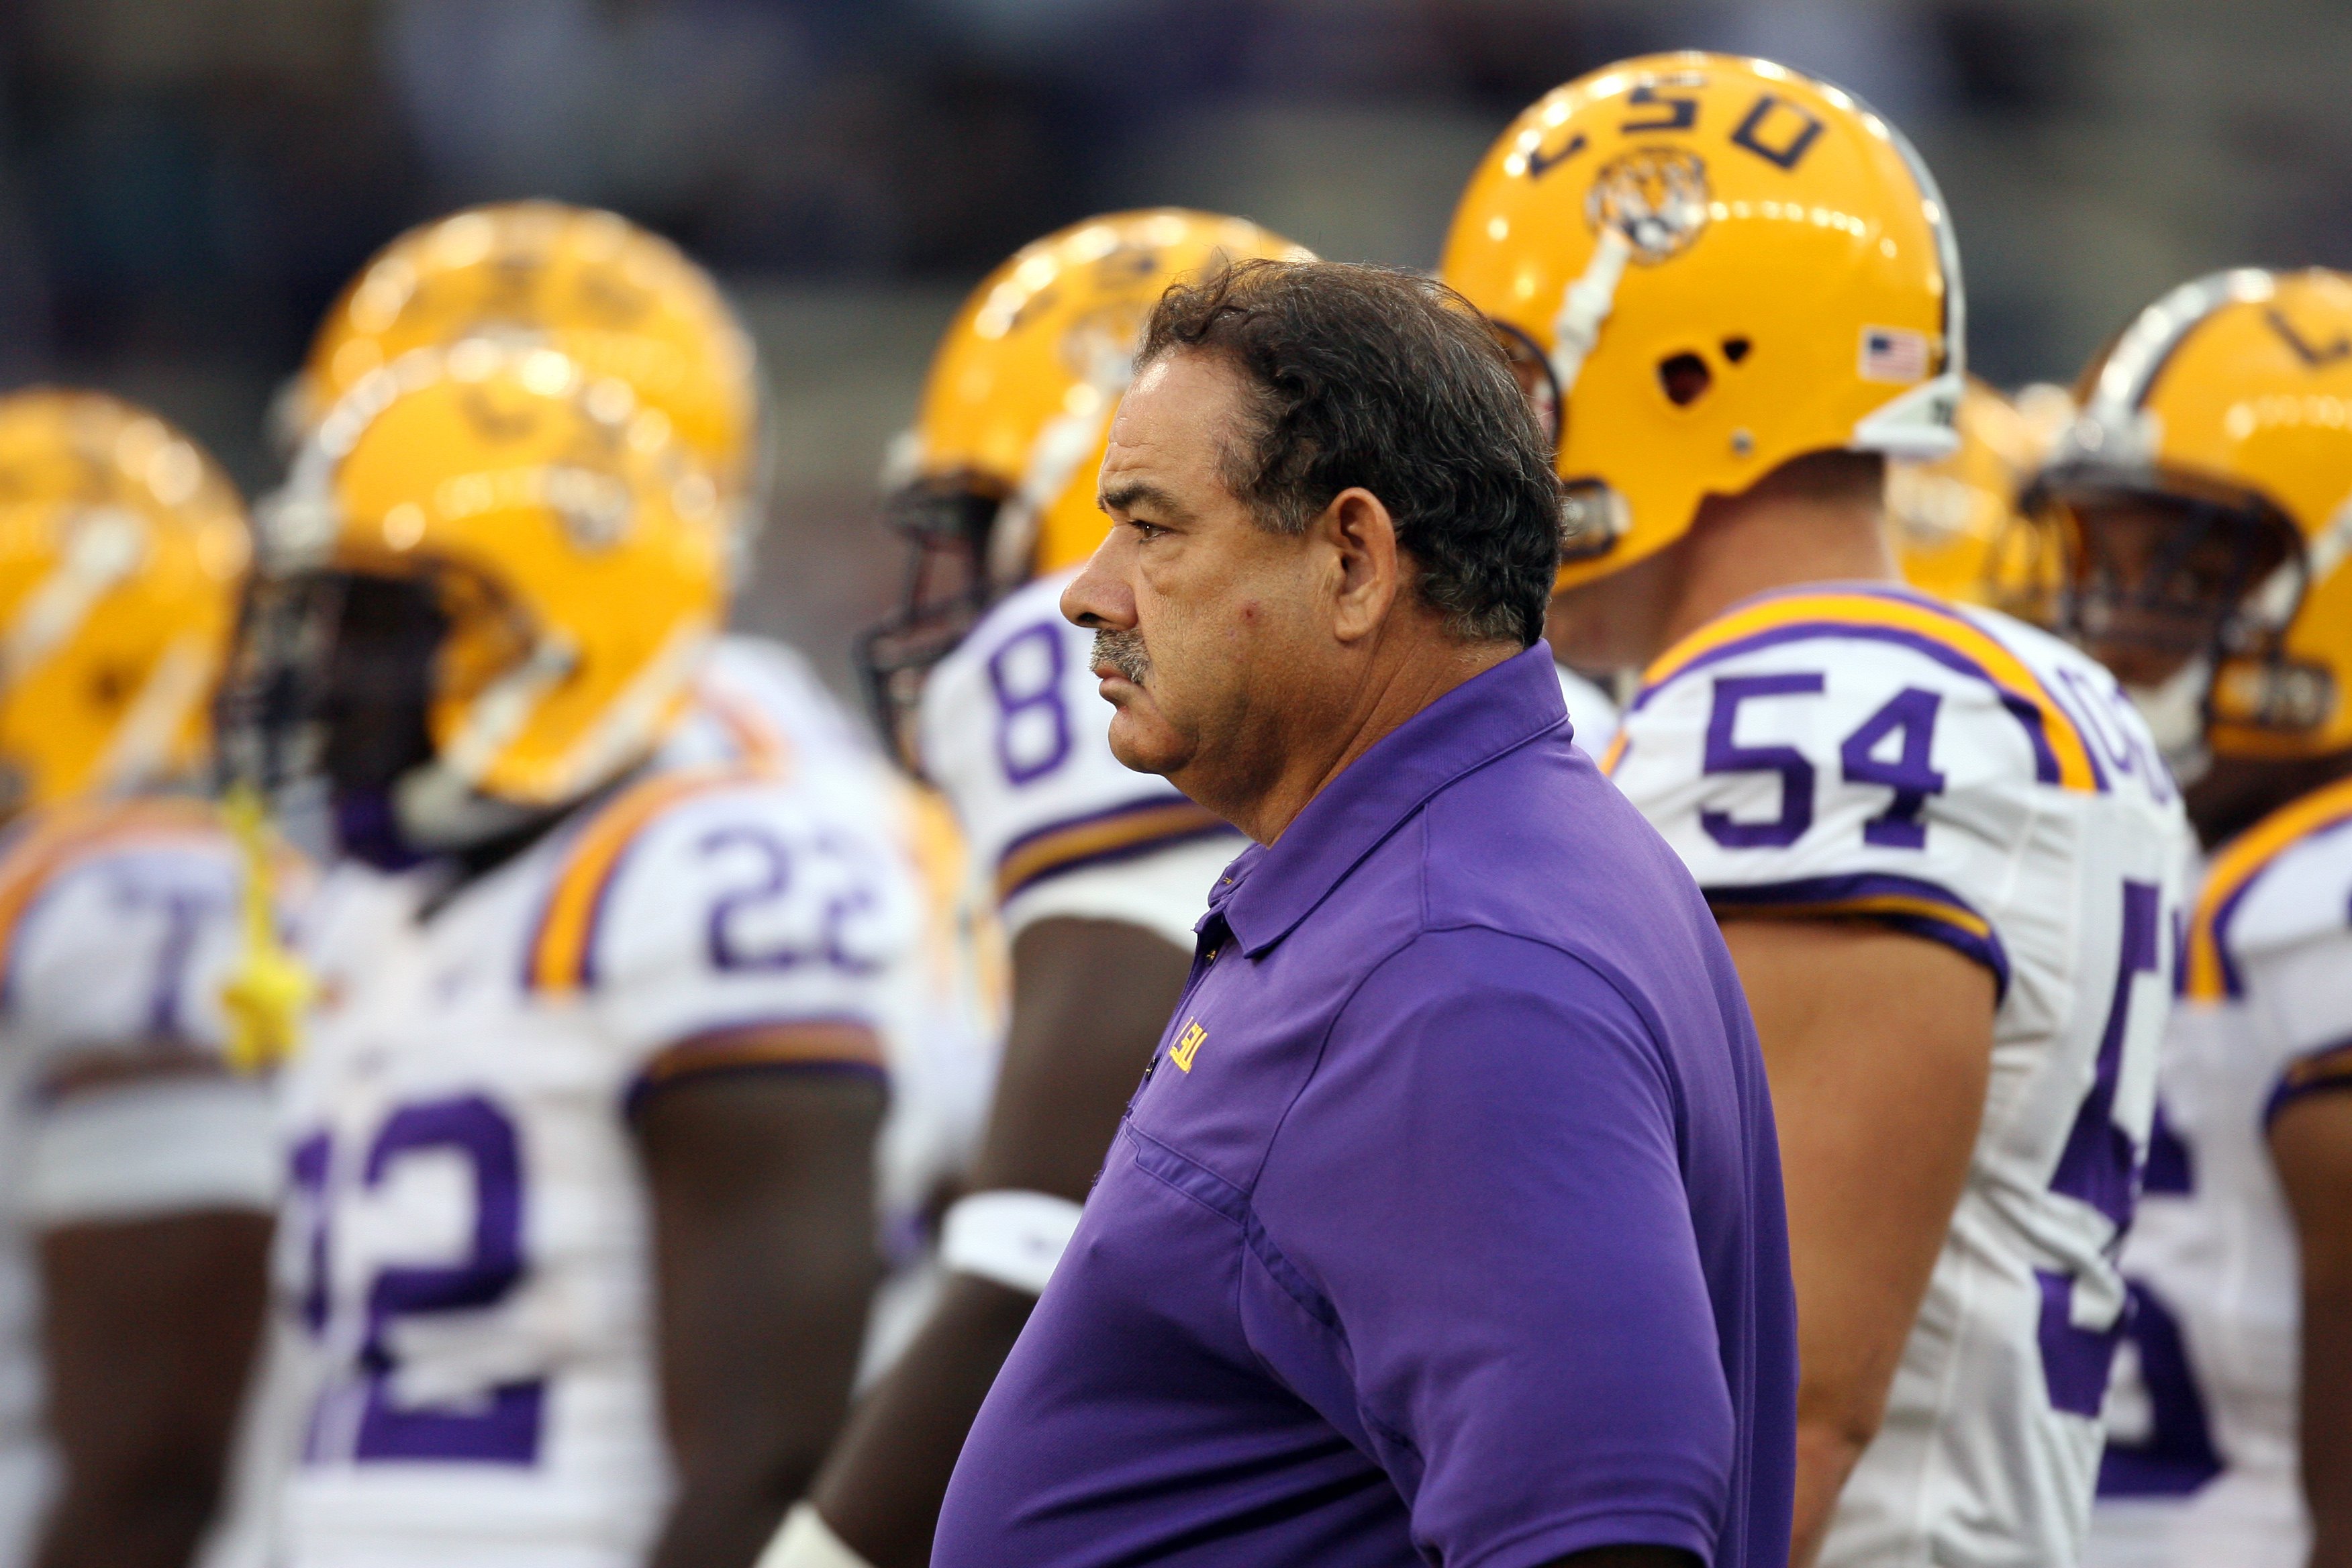 SEATTLE - SEPTEMBER 5:  Defensive coordinator John Chavis of the LSU Tigers looks on during pre-game warm-up against the Washington Huskies on September 5, 2009 at Husky Stadium in Seattle, Washington. The LSU Tigers defeated the Washington Huskies 31-23.